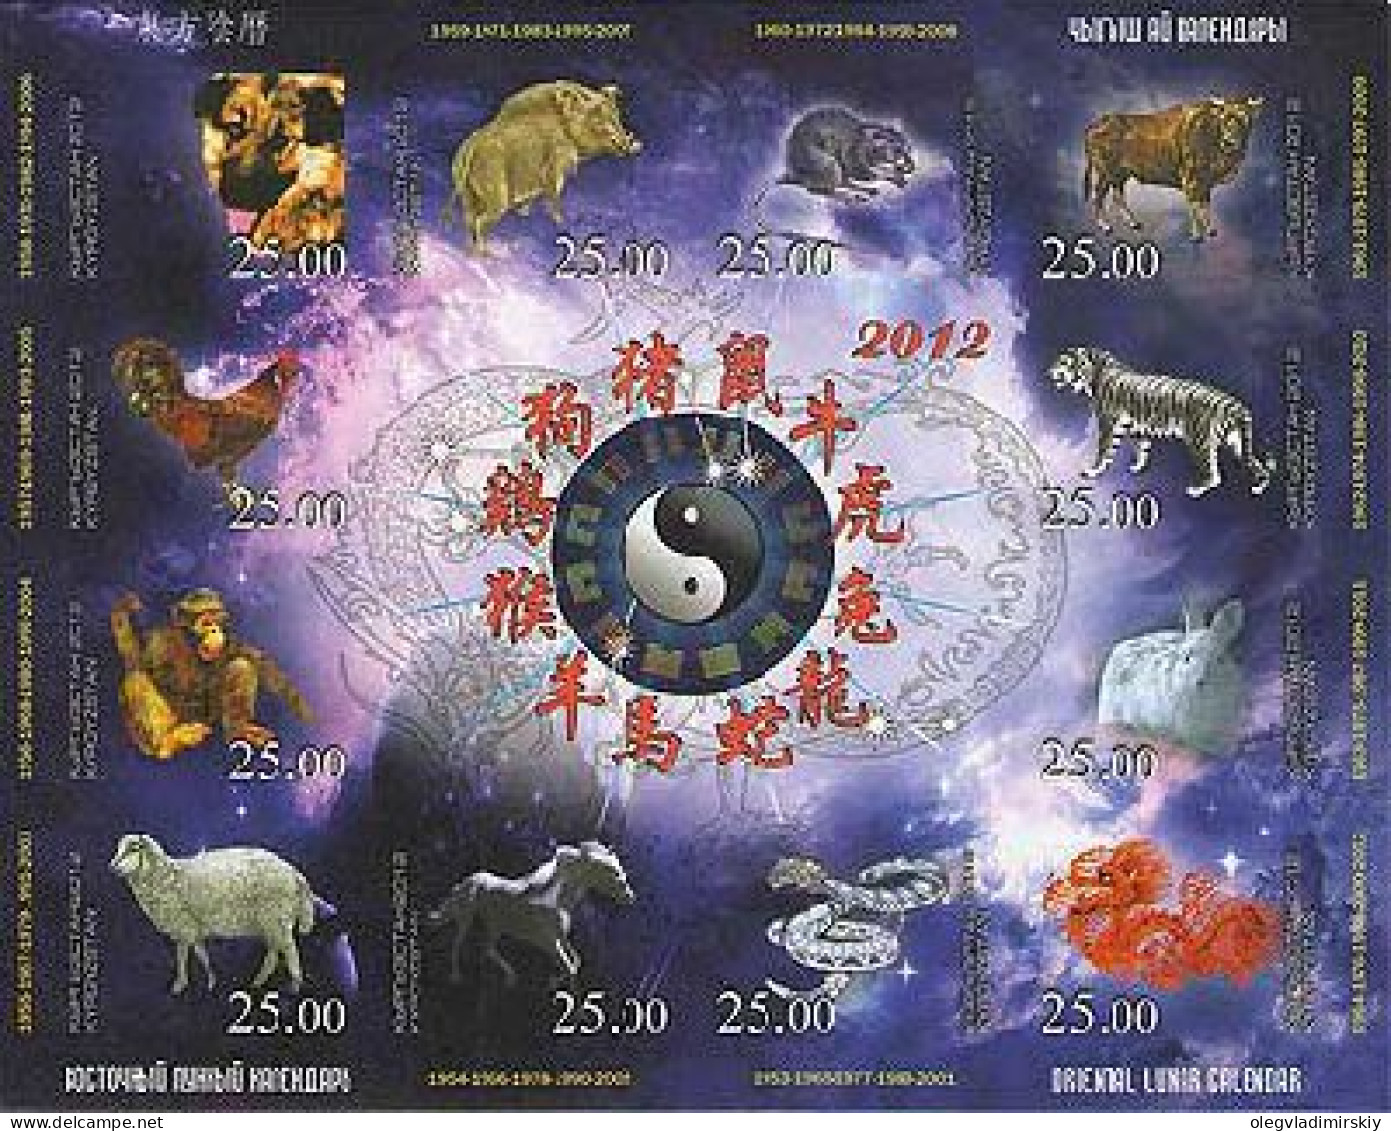 Kyrgyzstan 2012 Lunar Chinese Calendar Horoscope All Zodiac Signs RARE IMPERFORETED Block \ Sheetlet MNH - Nouvel An Chinois